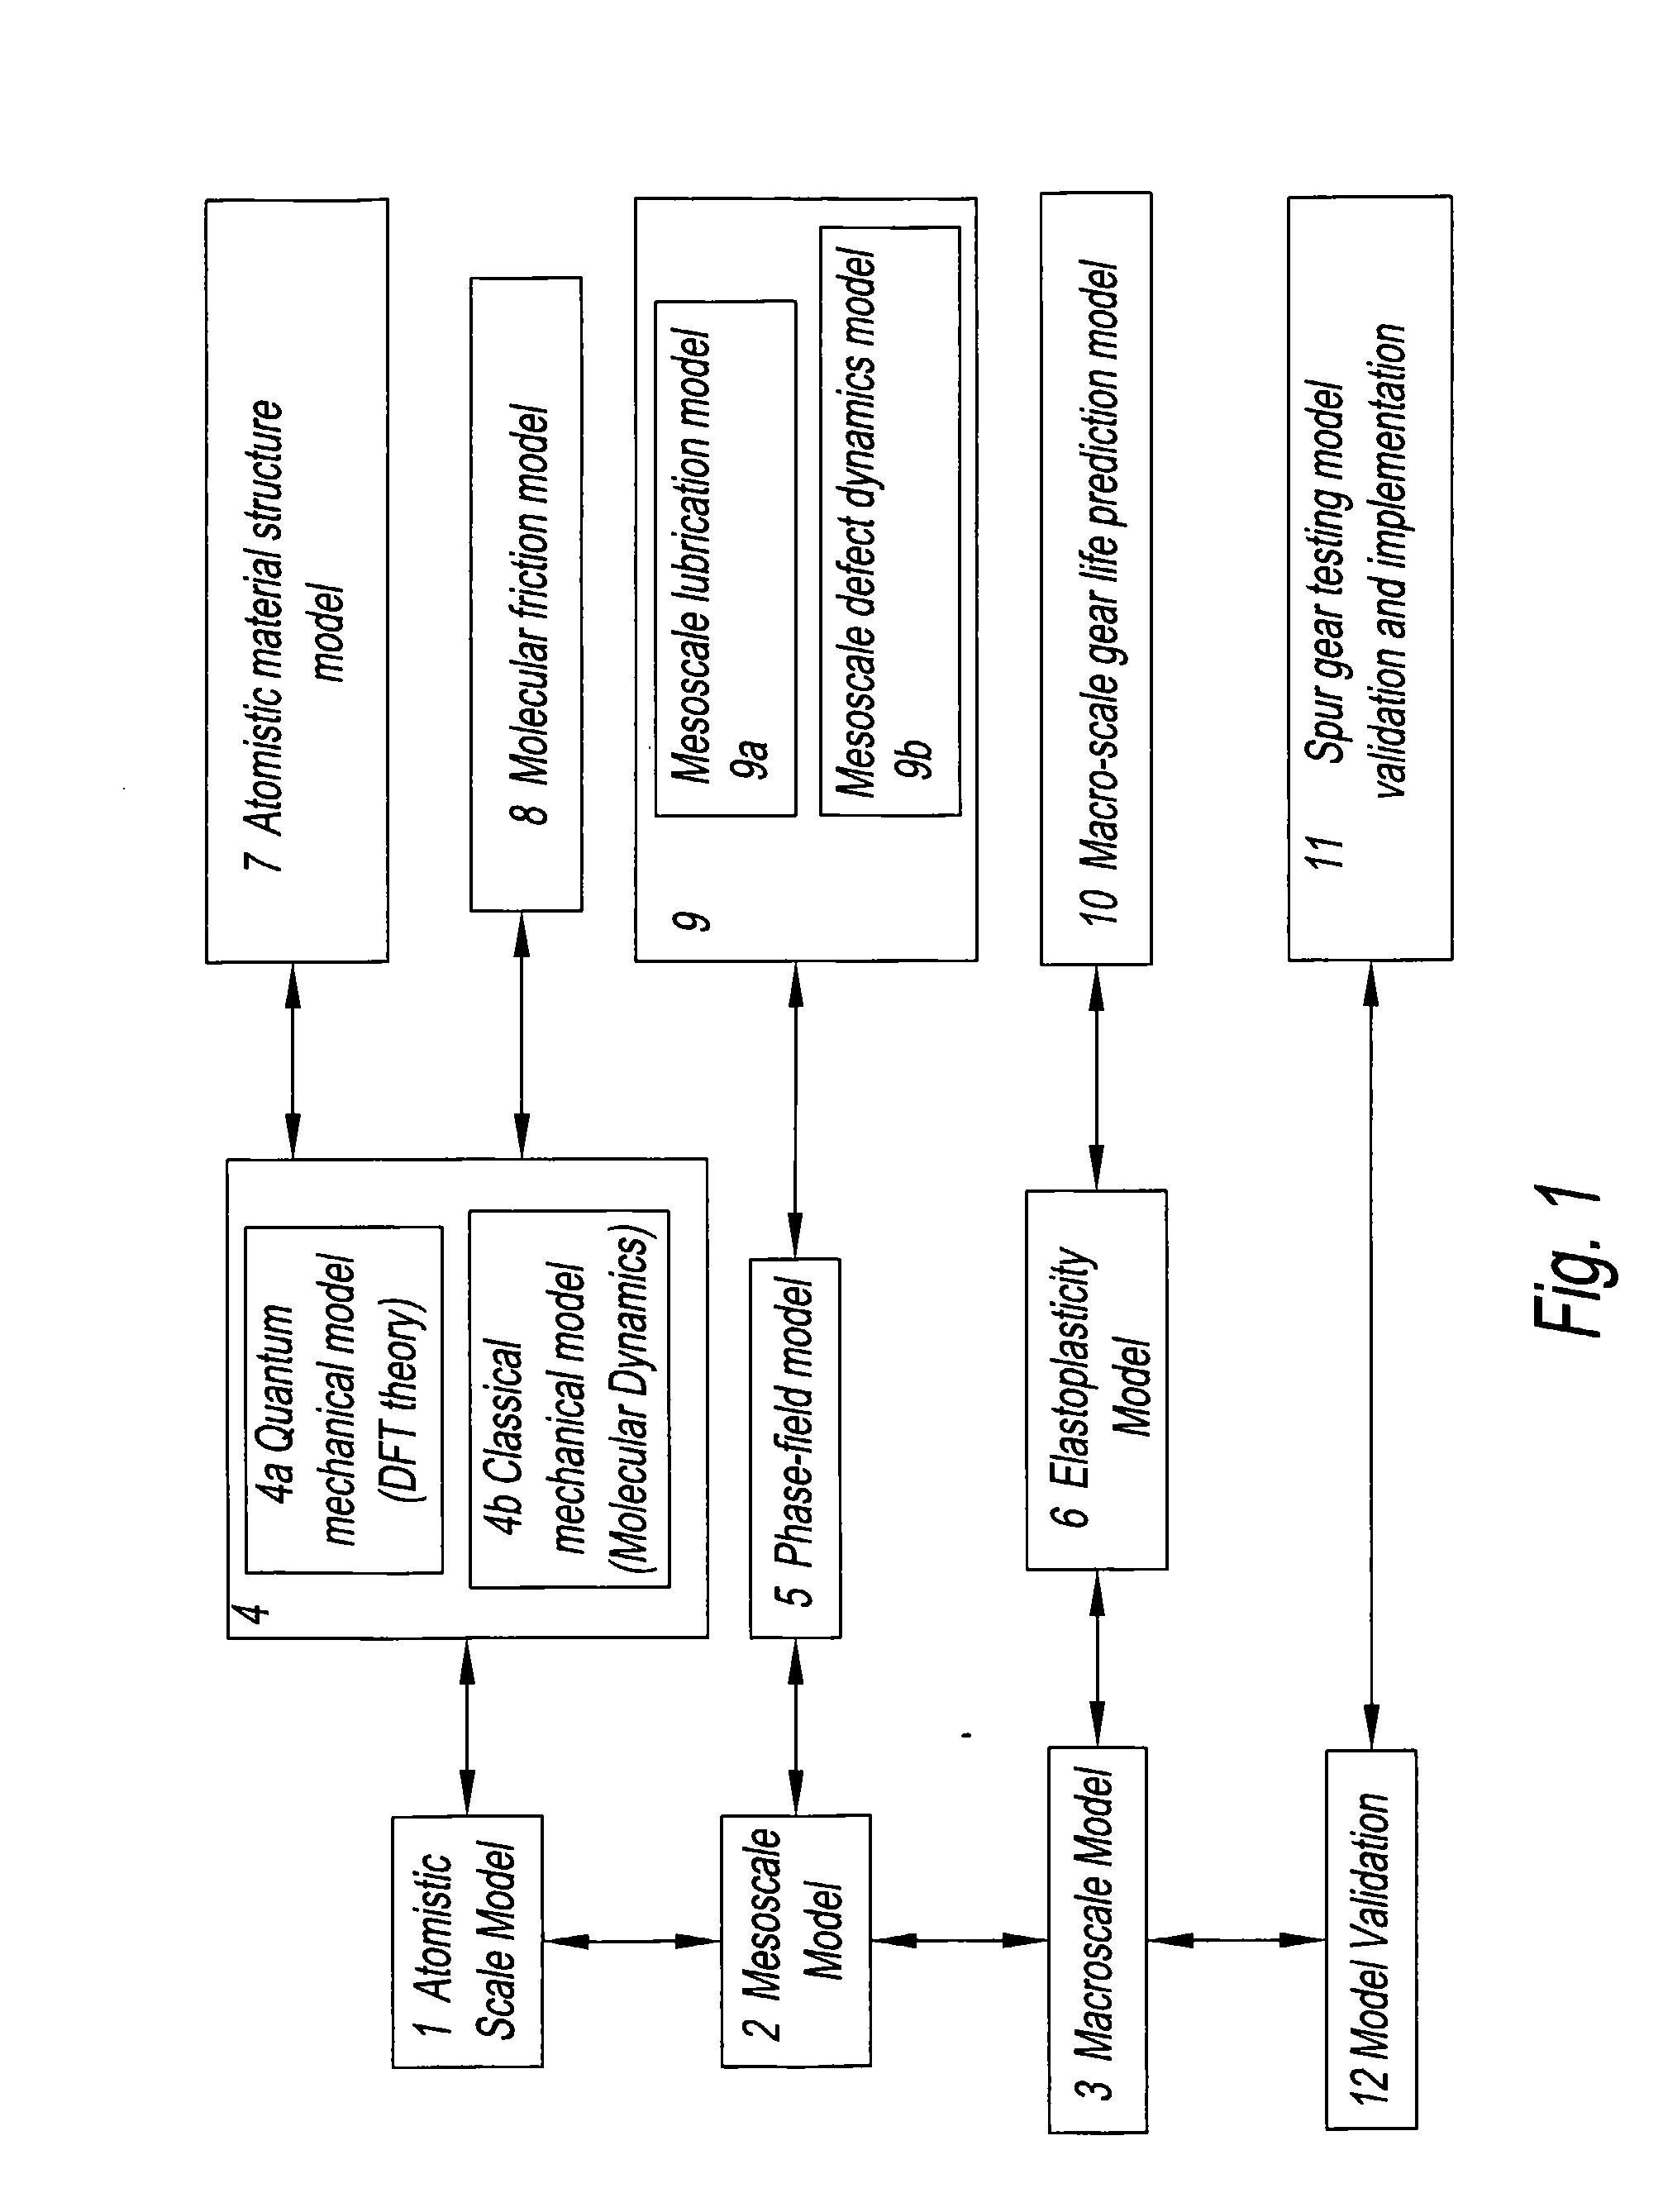 Systems and Methods for Modeling Surface Properties of a Mechanical Component